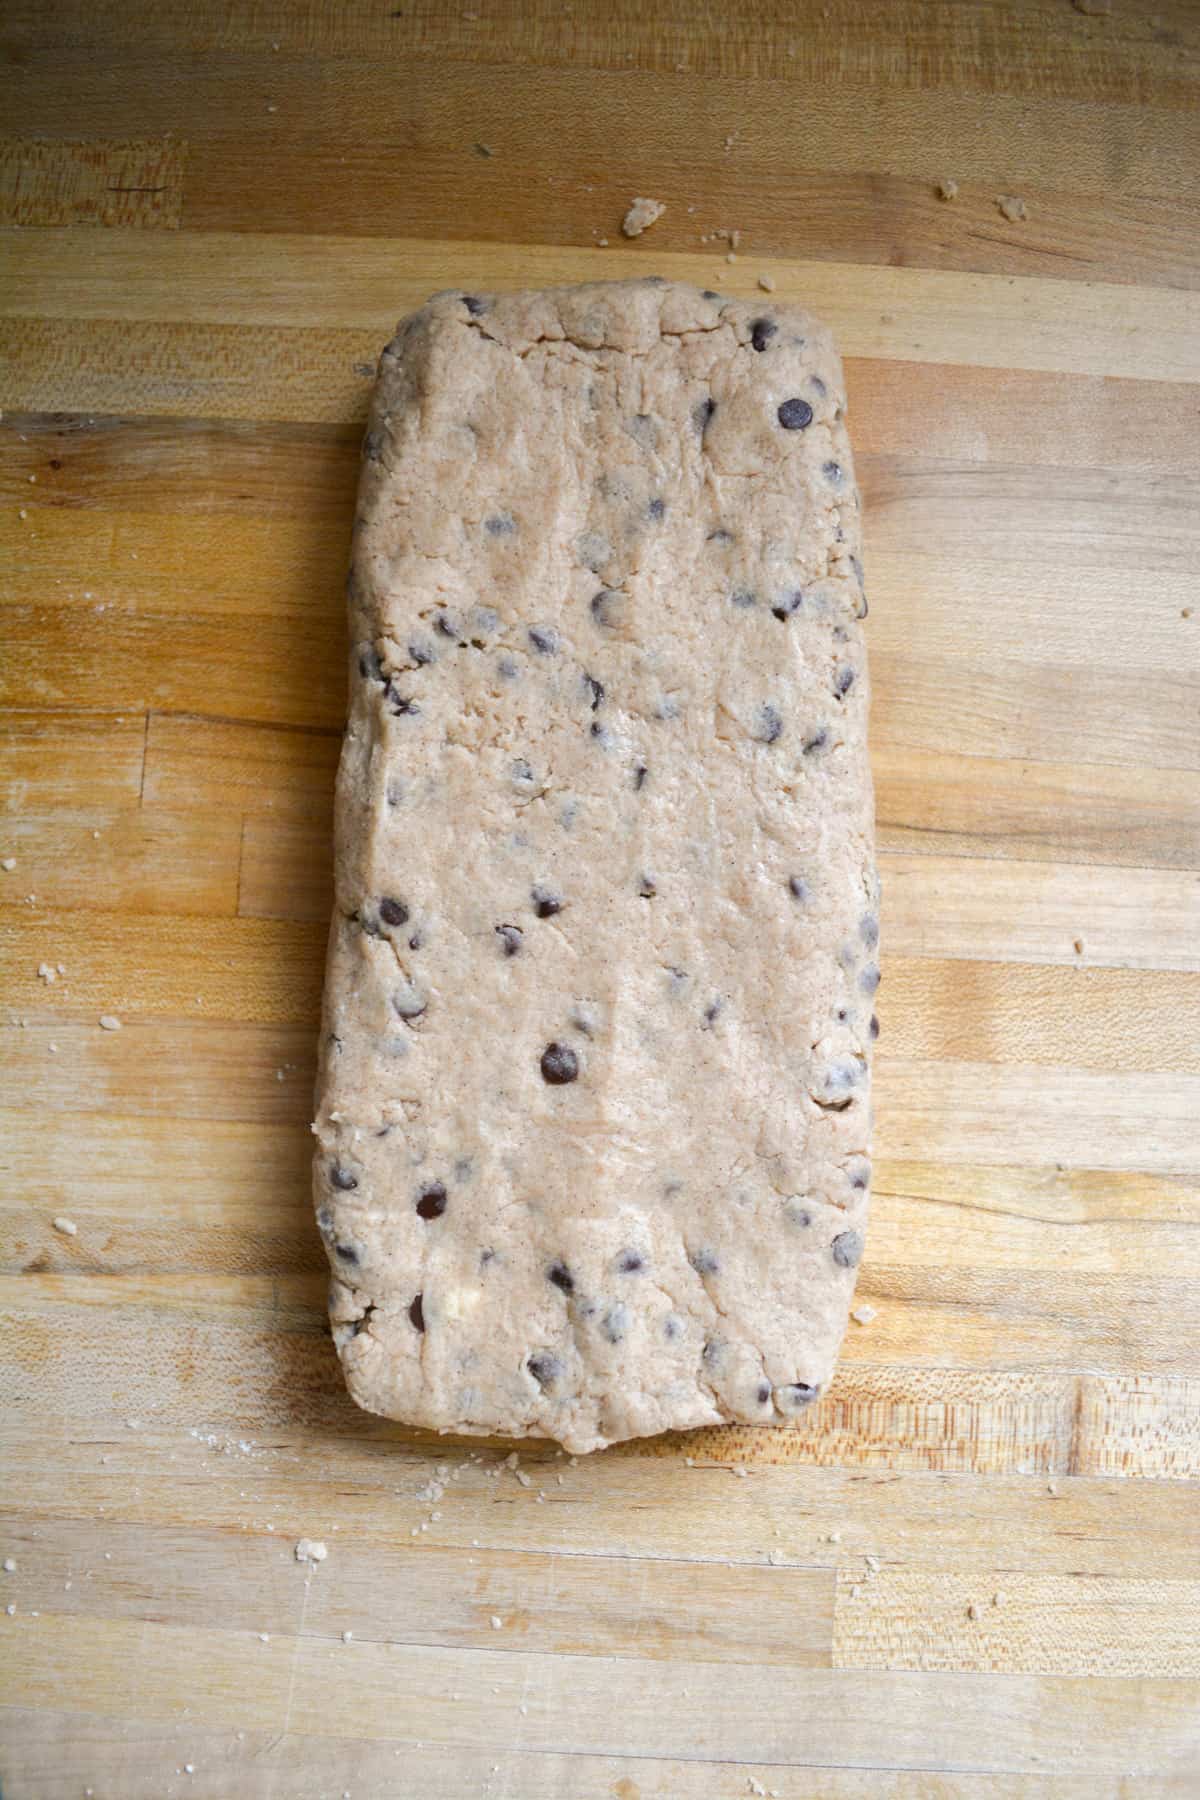 Scone dough patted into a rectangle on a wooden surface.